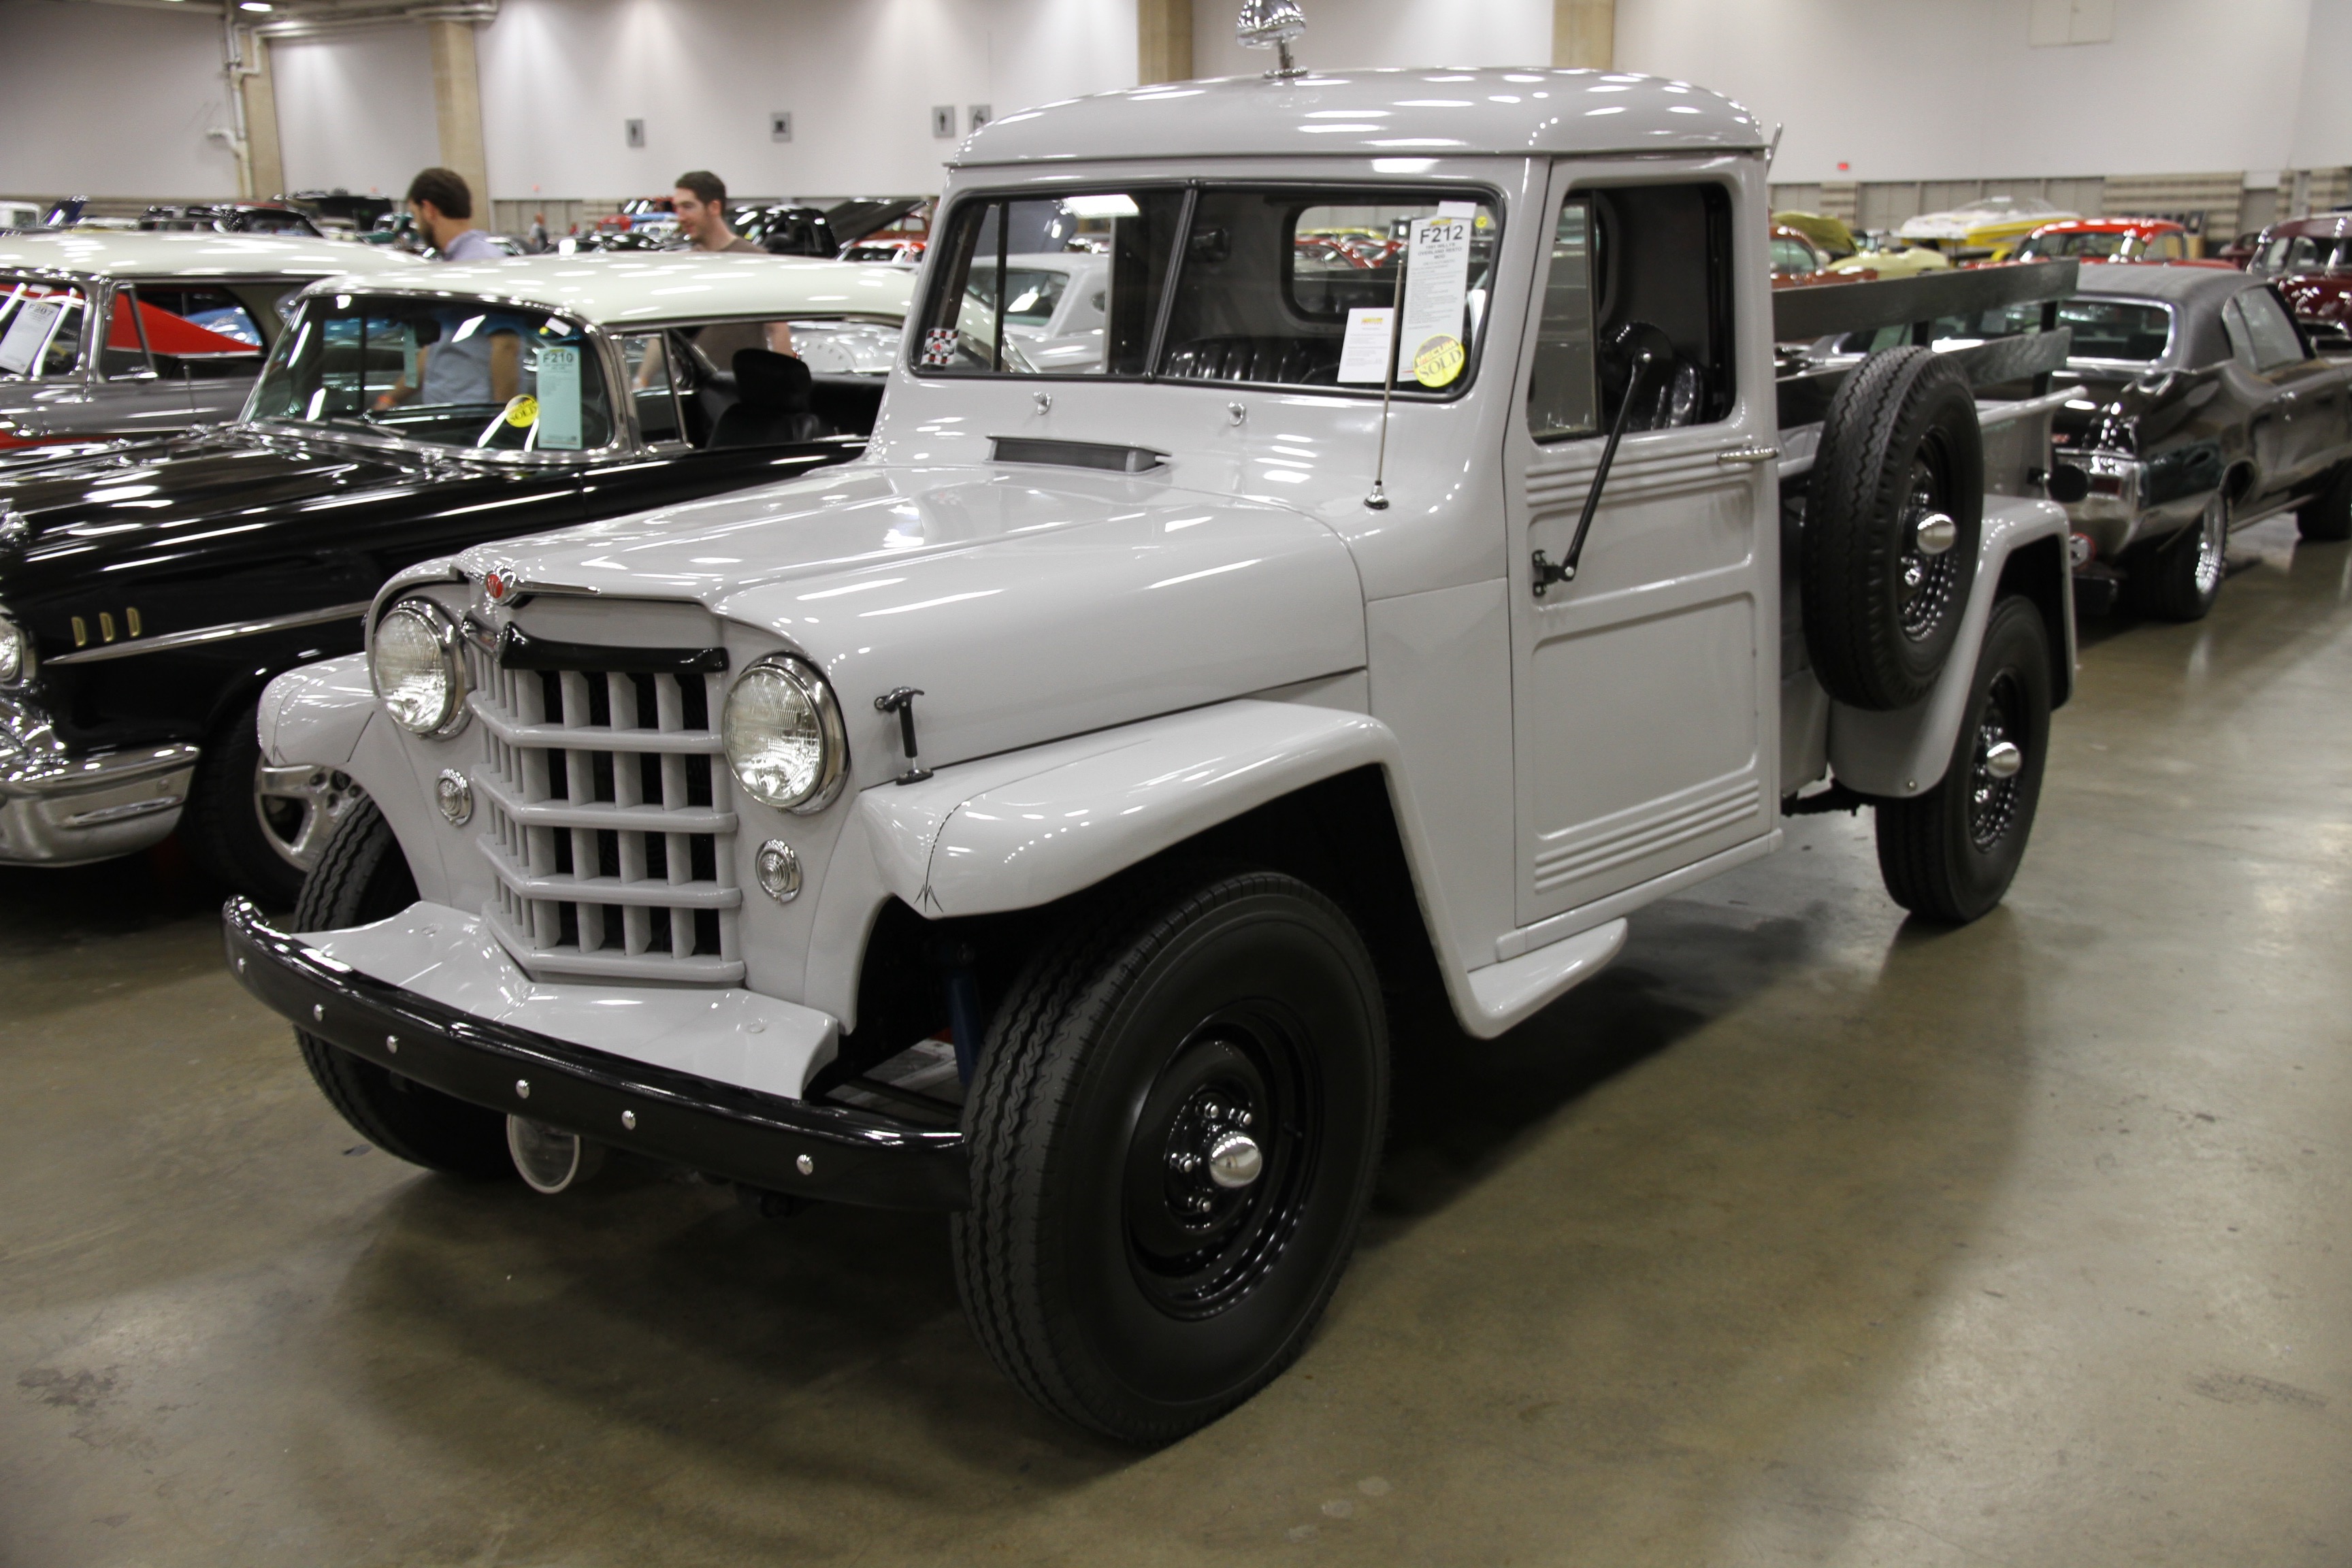 1954 willys-jeep 4-54 1 ton